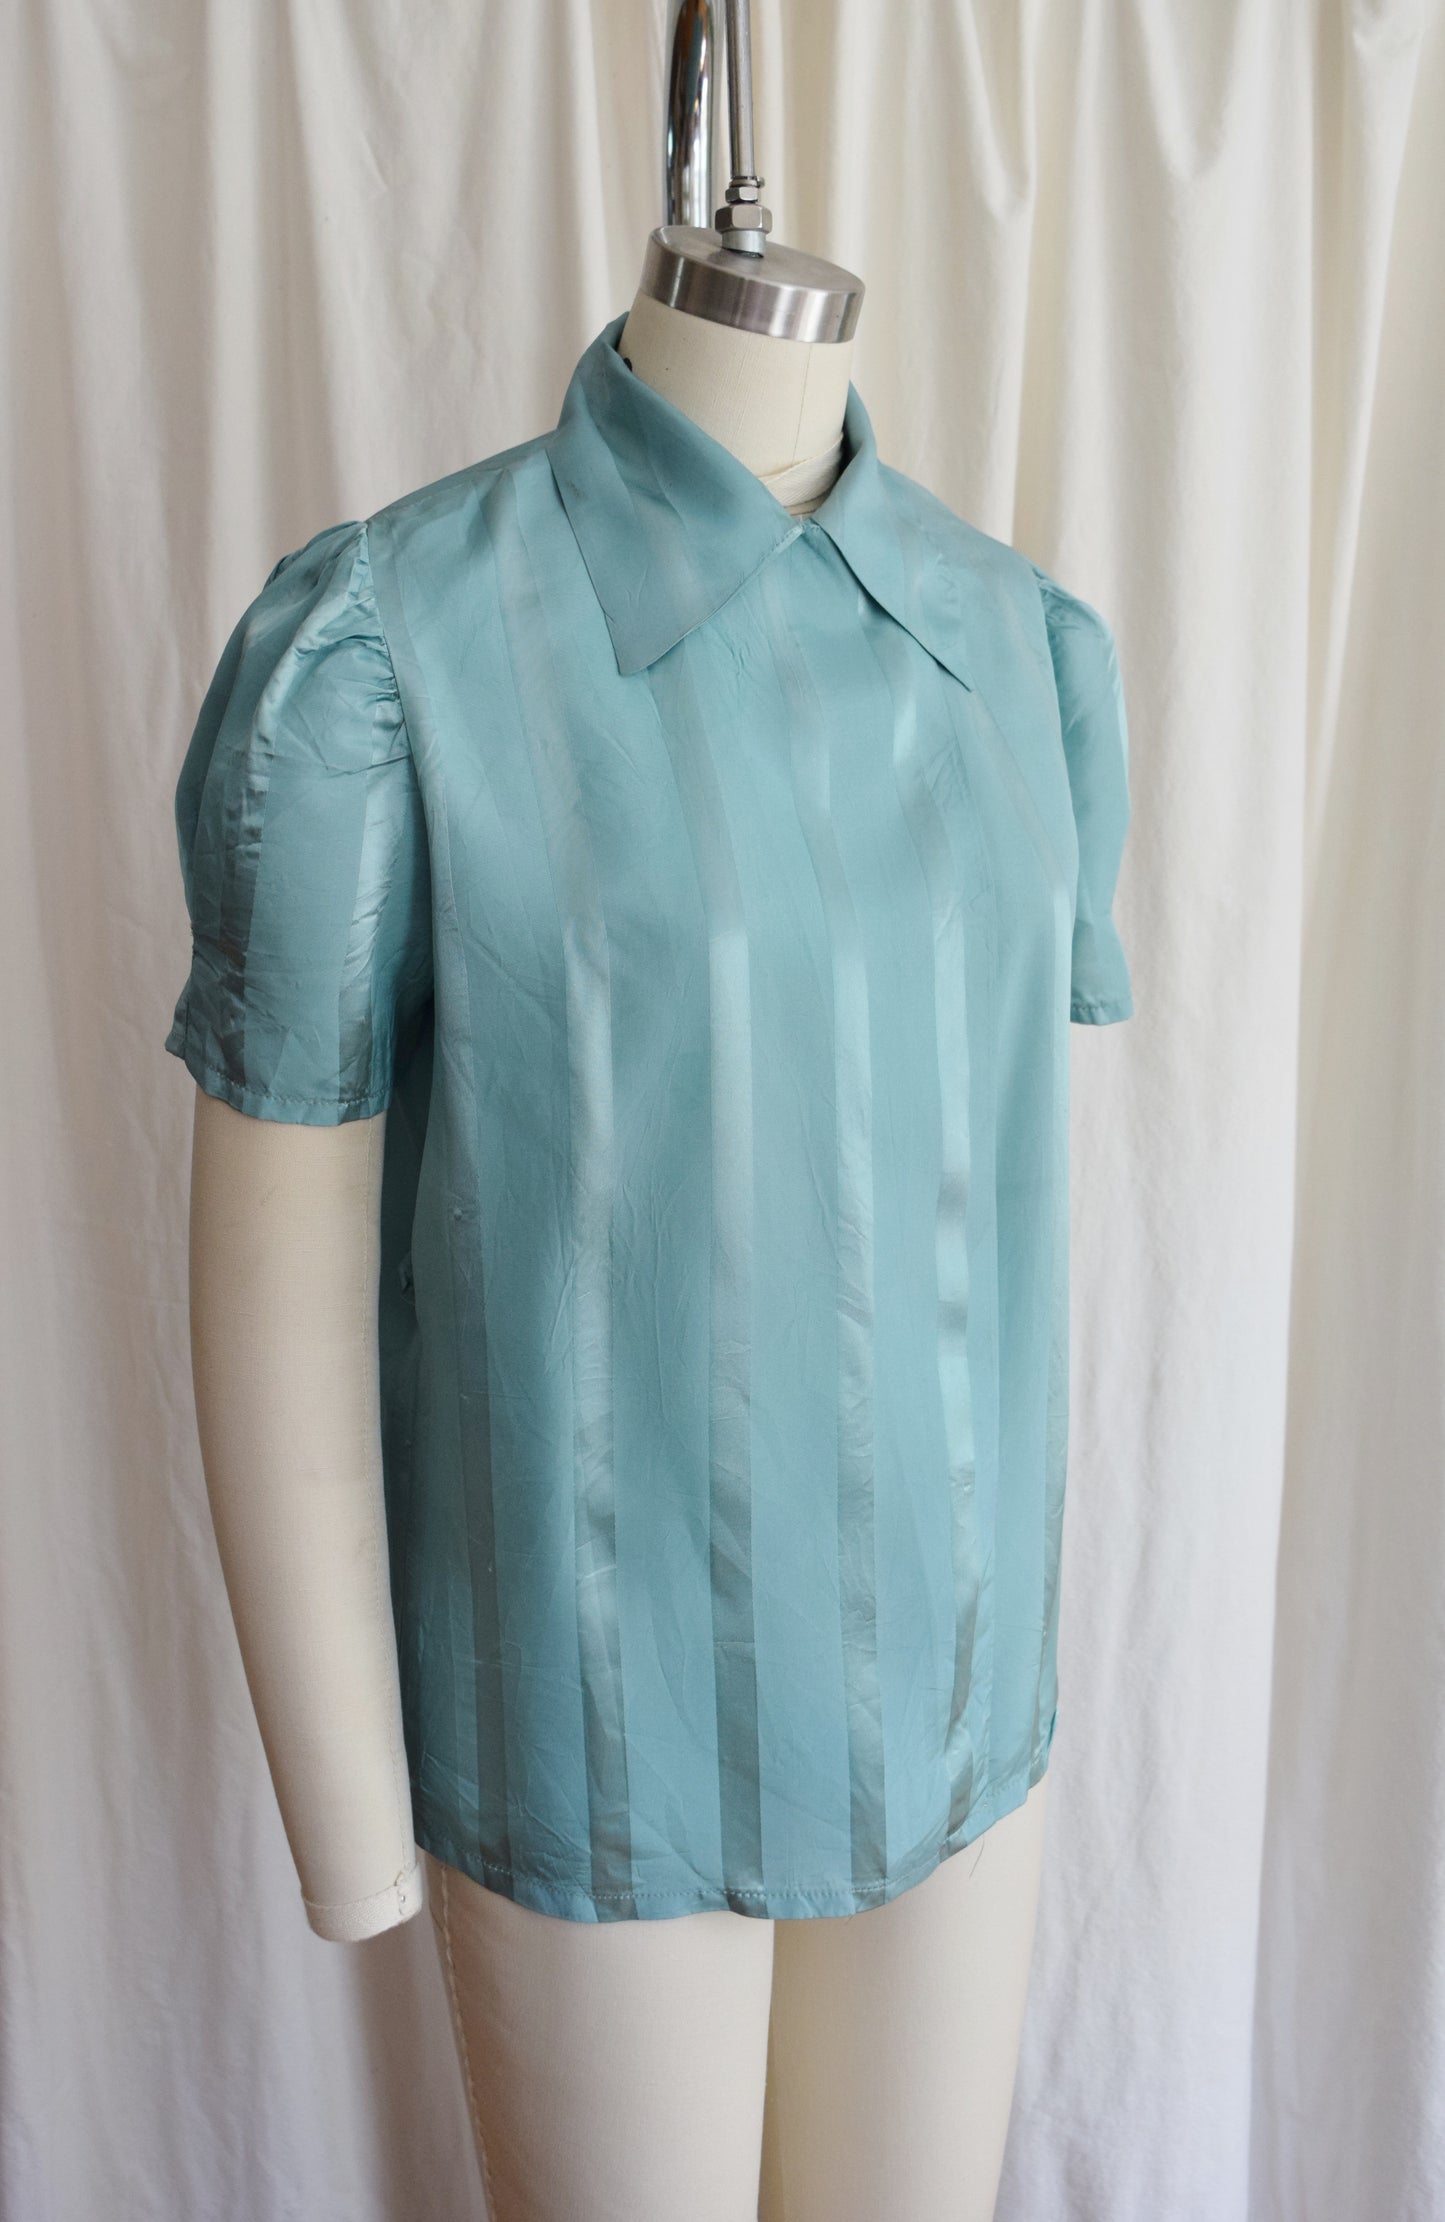 1940s Striped Teal Wrap Top / Loungewear Blouse with Belt